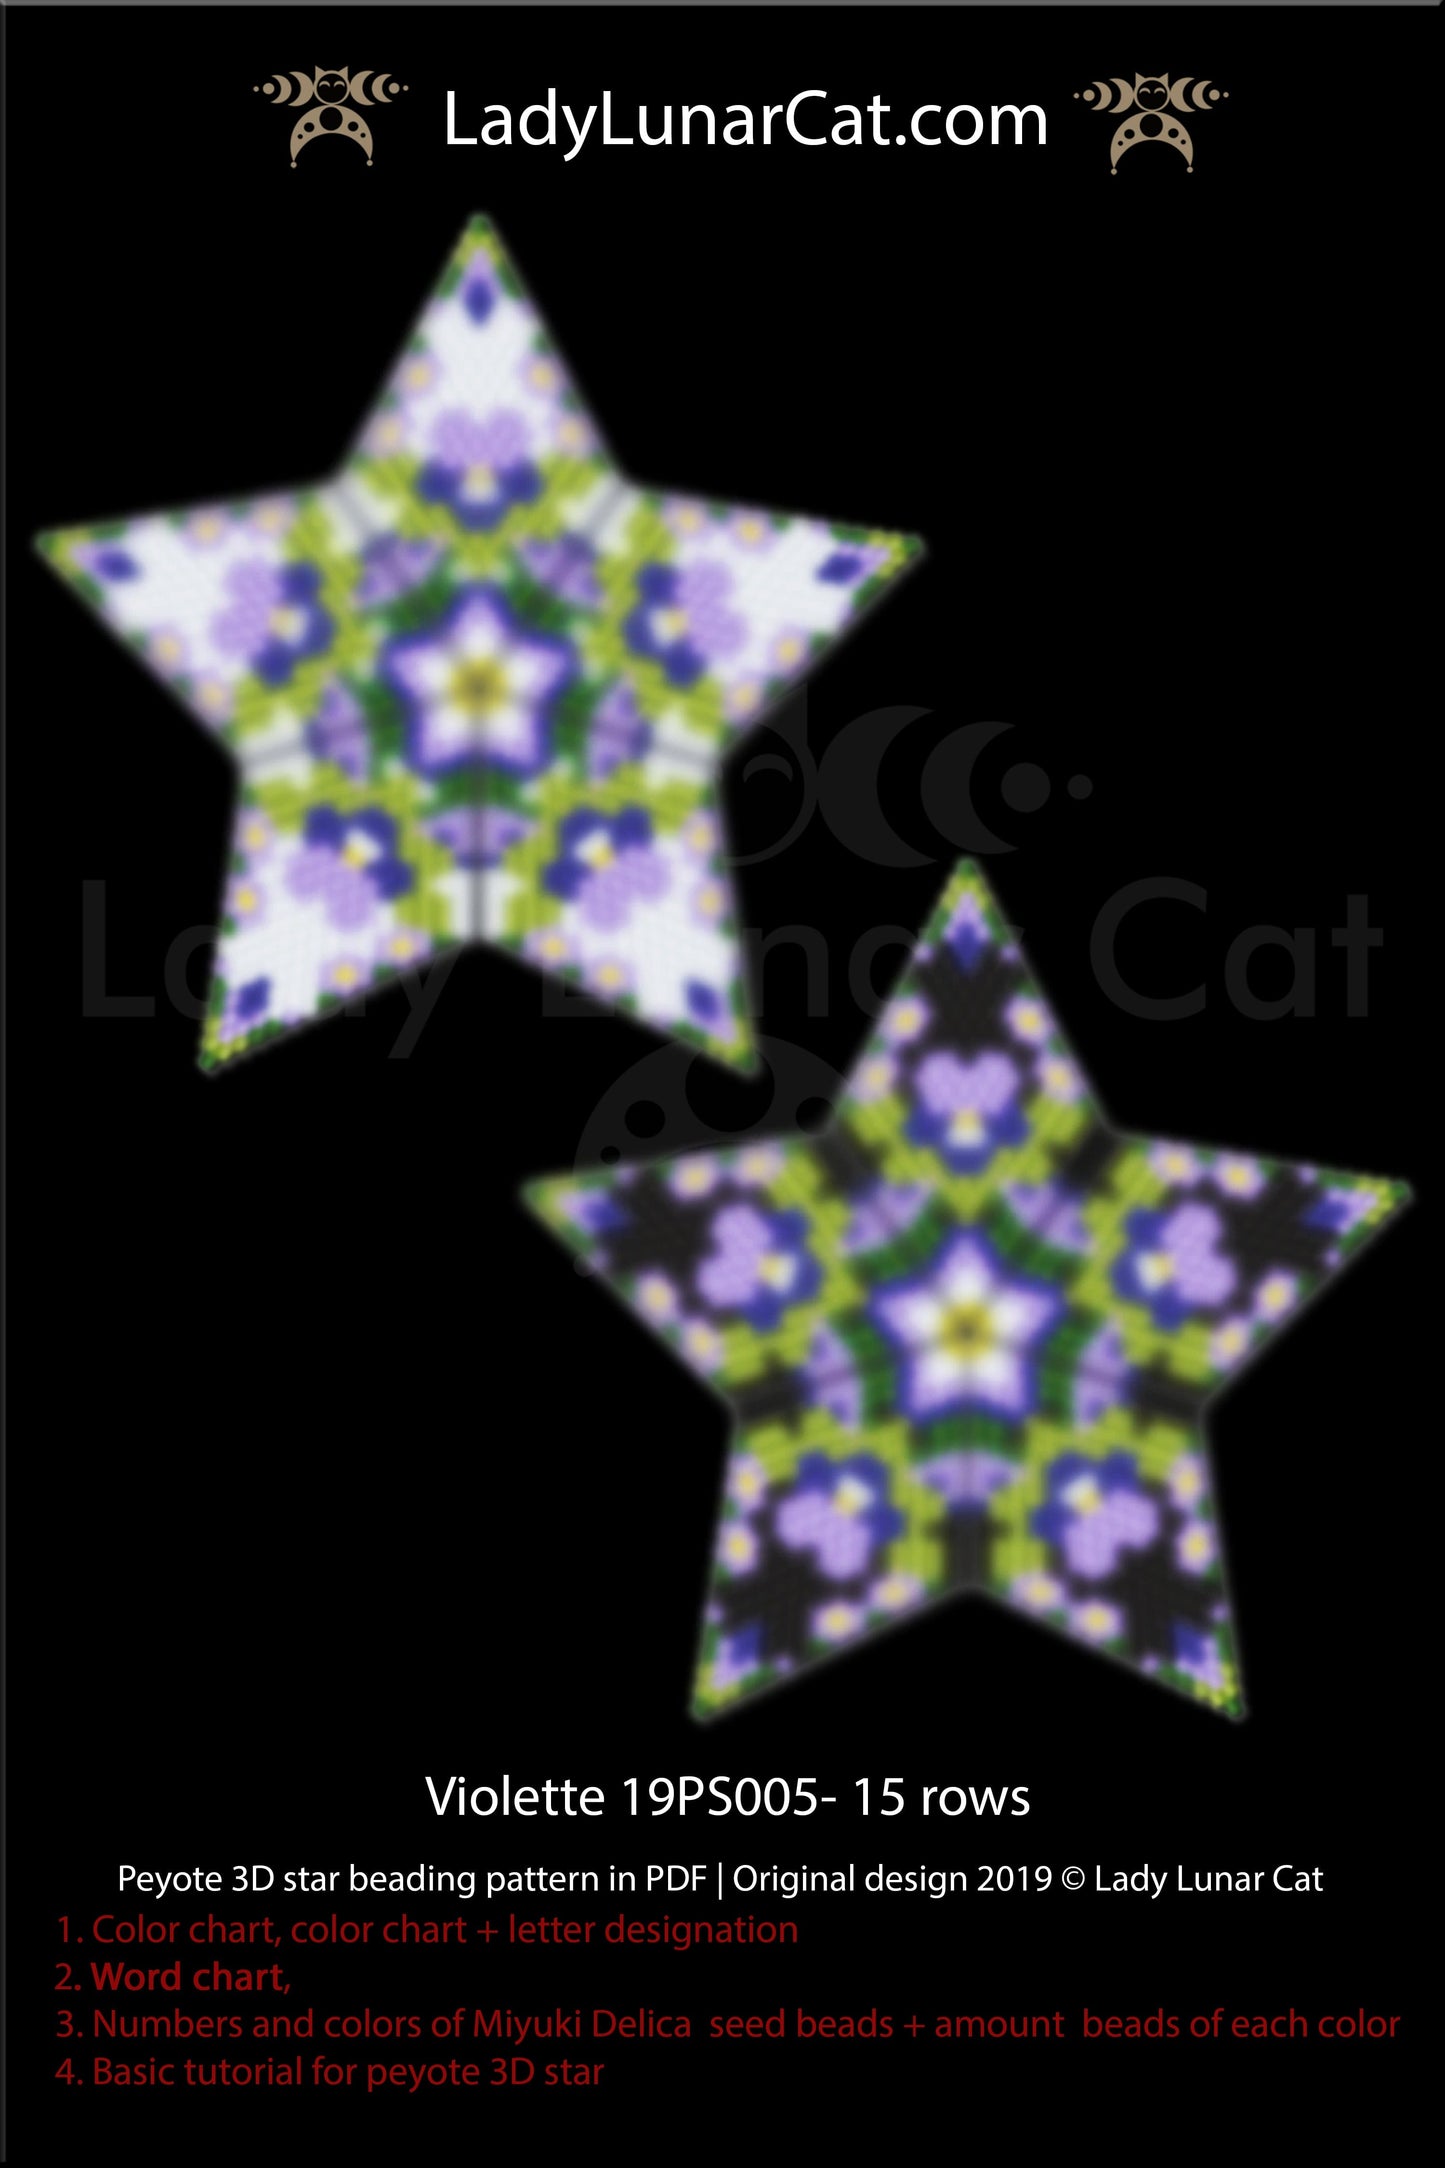 Peyote star pattern for beading - Violette 19PS005 15 rows LadyLunarCat